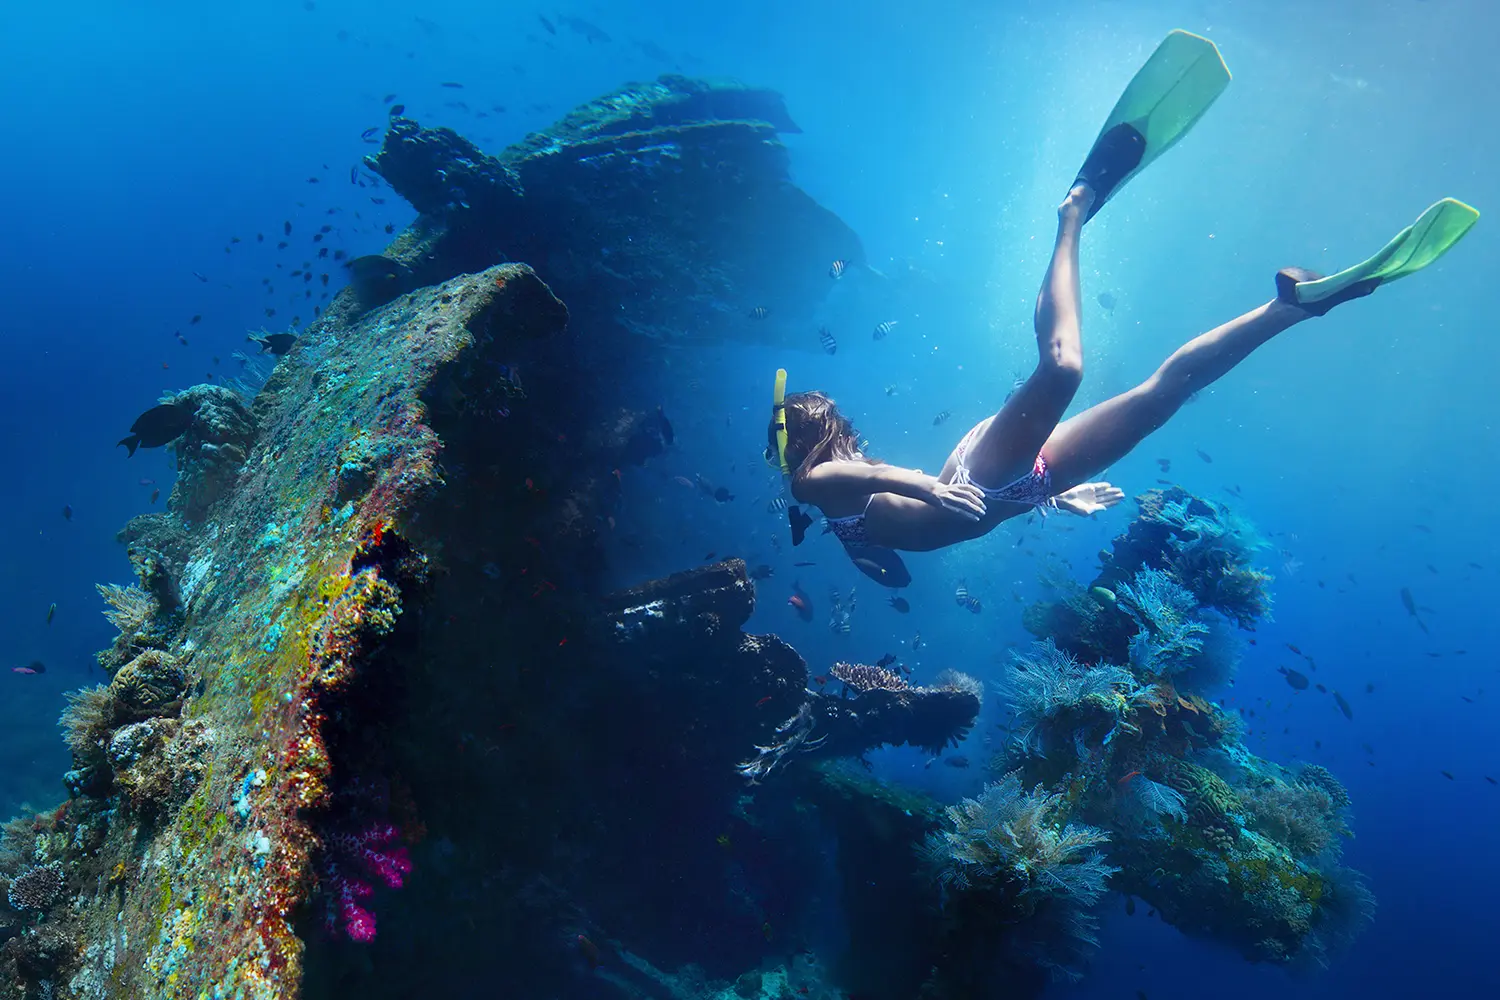 Underwater shoot of a woman exploring USAT Liberty wreck in Bali